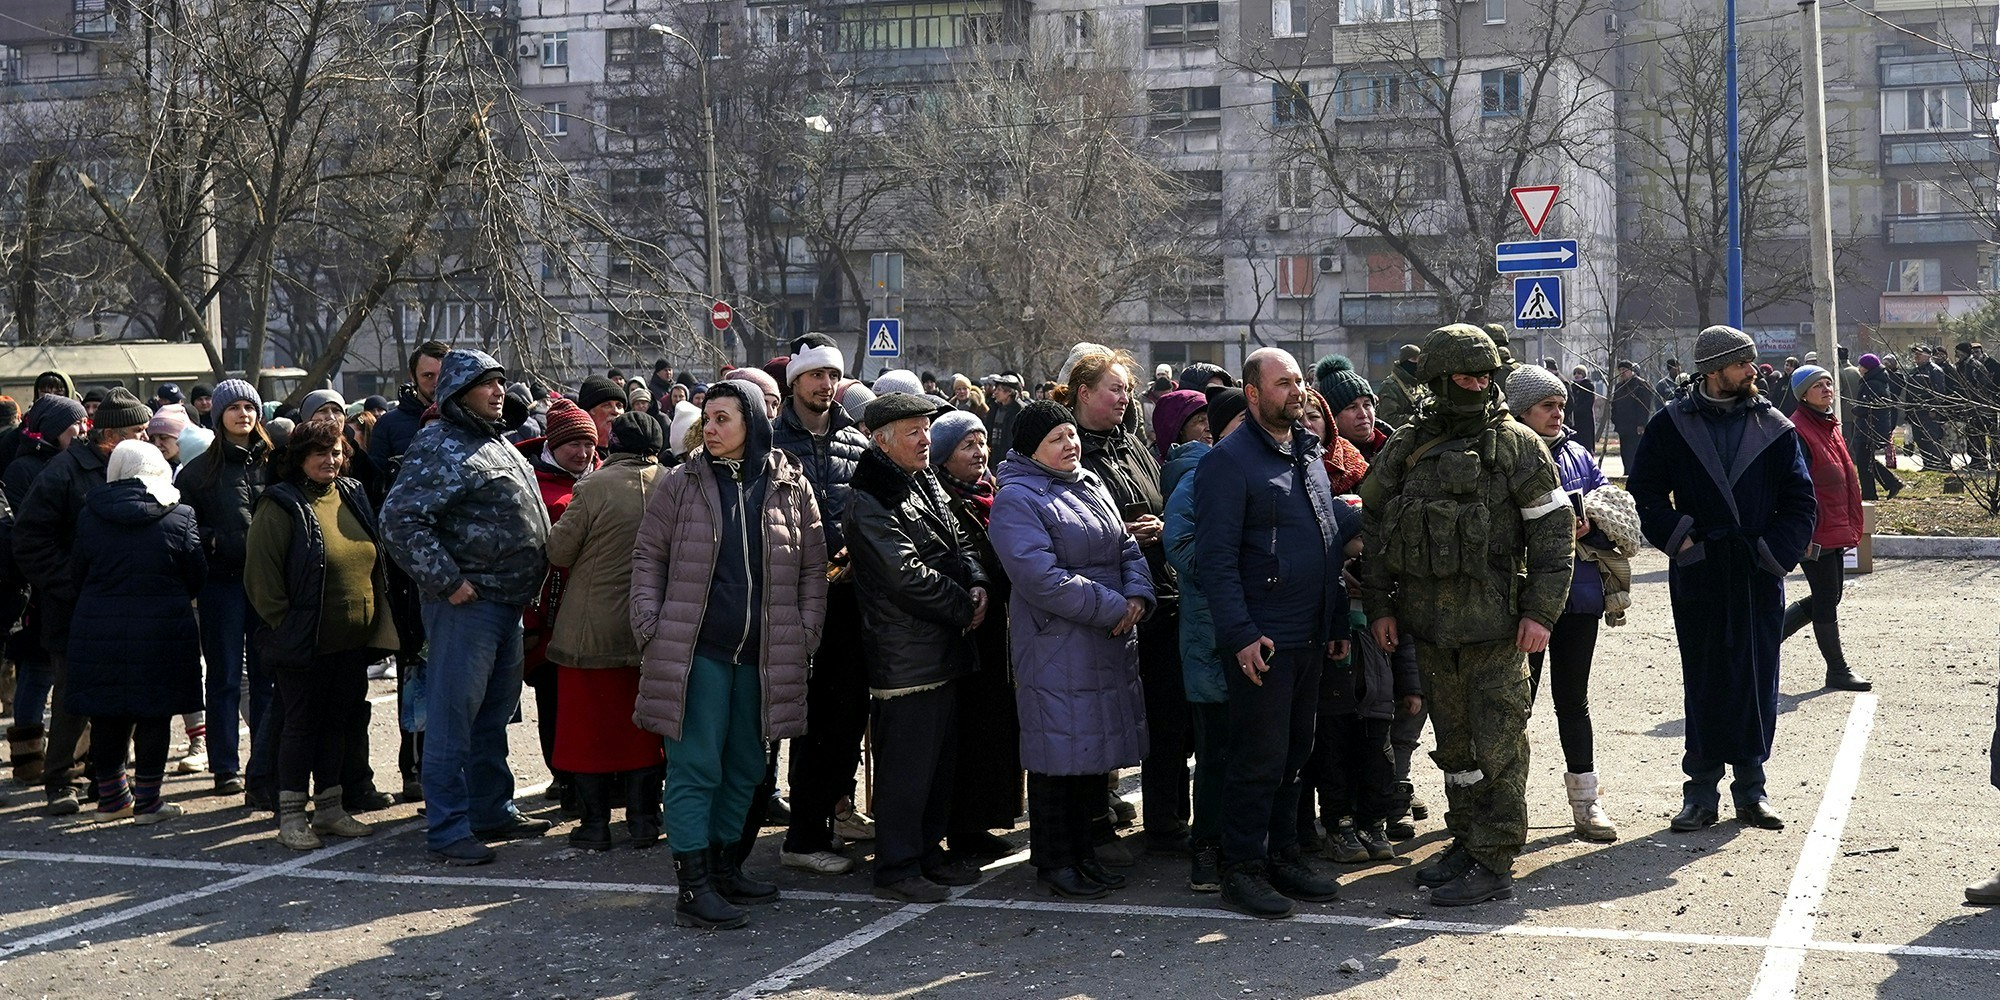 MARIUPOL, UKRAINE - MARCH 24: Civilians are being evacuated along humanitarian corridors from the Ukrainian city of Mariupol under the control of Russian military and pro-Russian separatists, on March 24, 2022. (Photo by Stringer/Anadolu Agency via Getty Images)